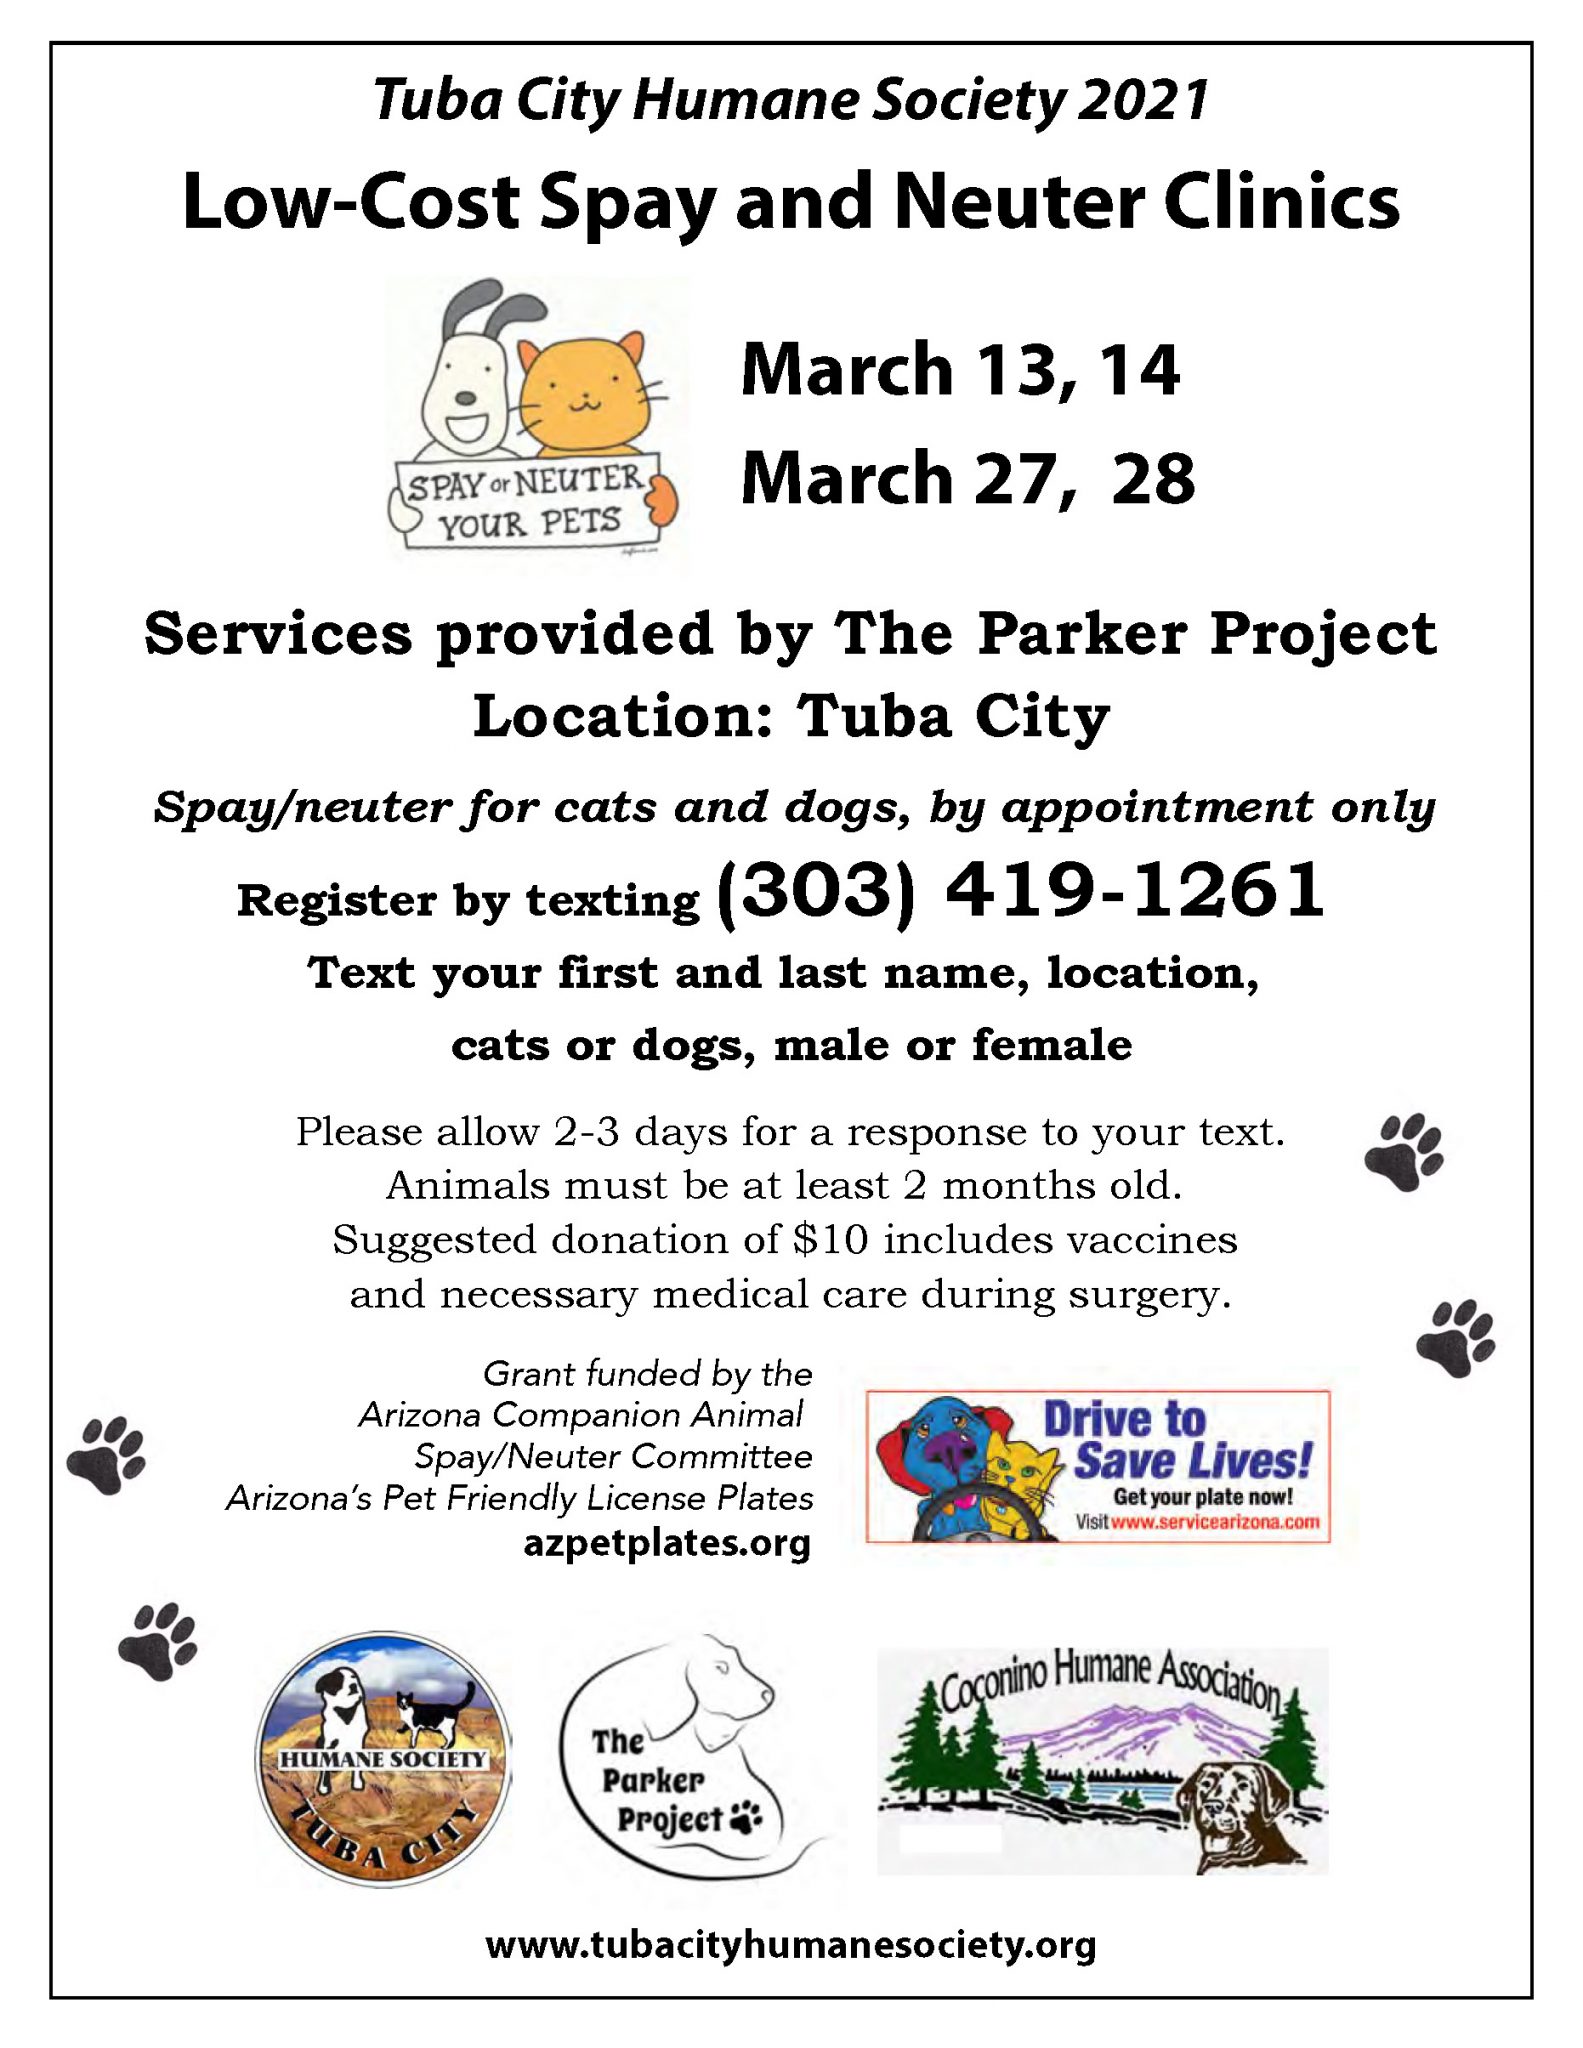 snip low cost spay neuter clinic